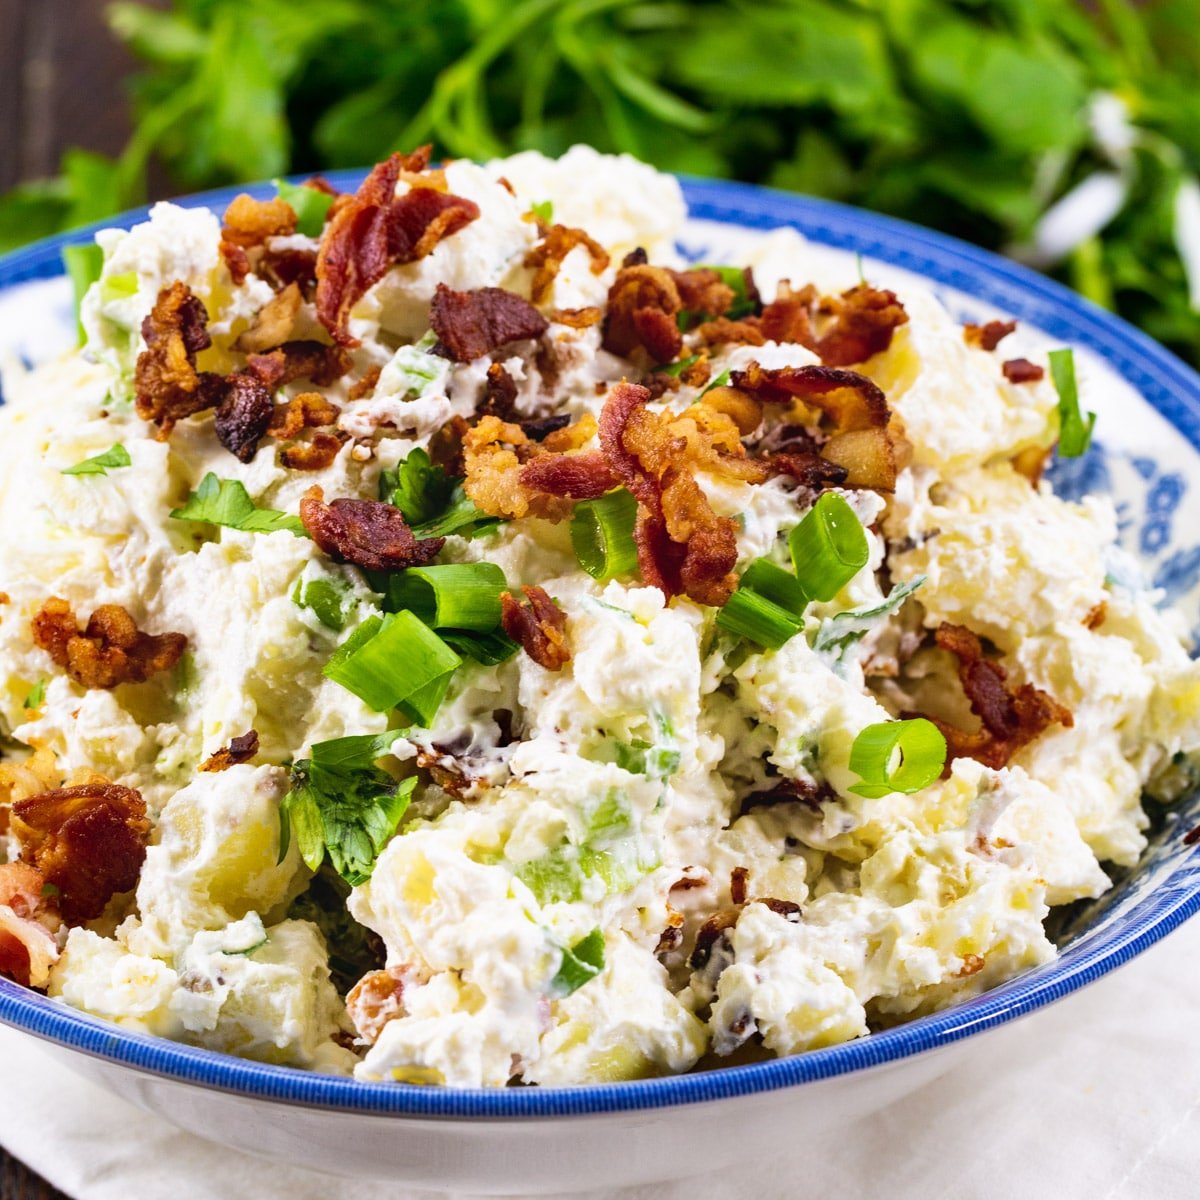 Sour Cream and Bacon Potato Salad in a blue and white bowl.